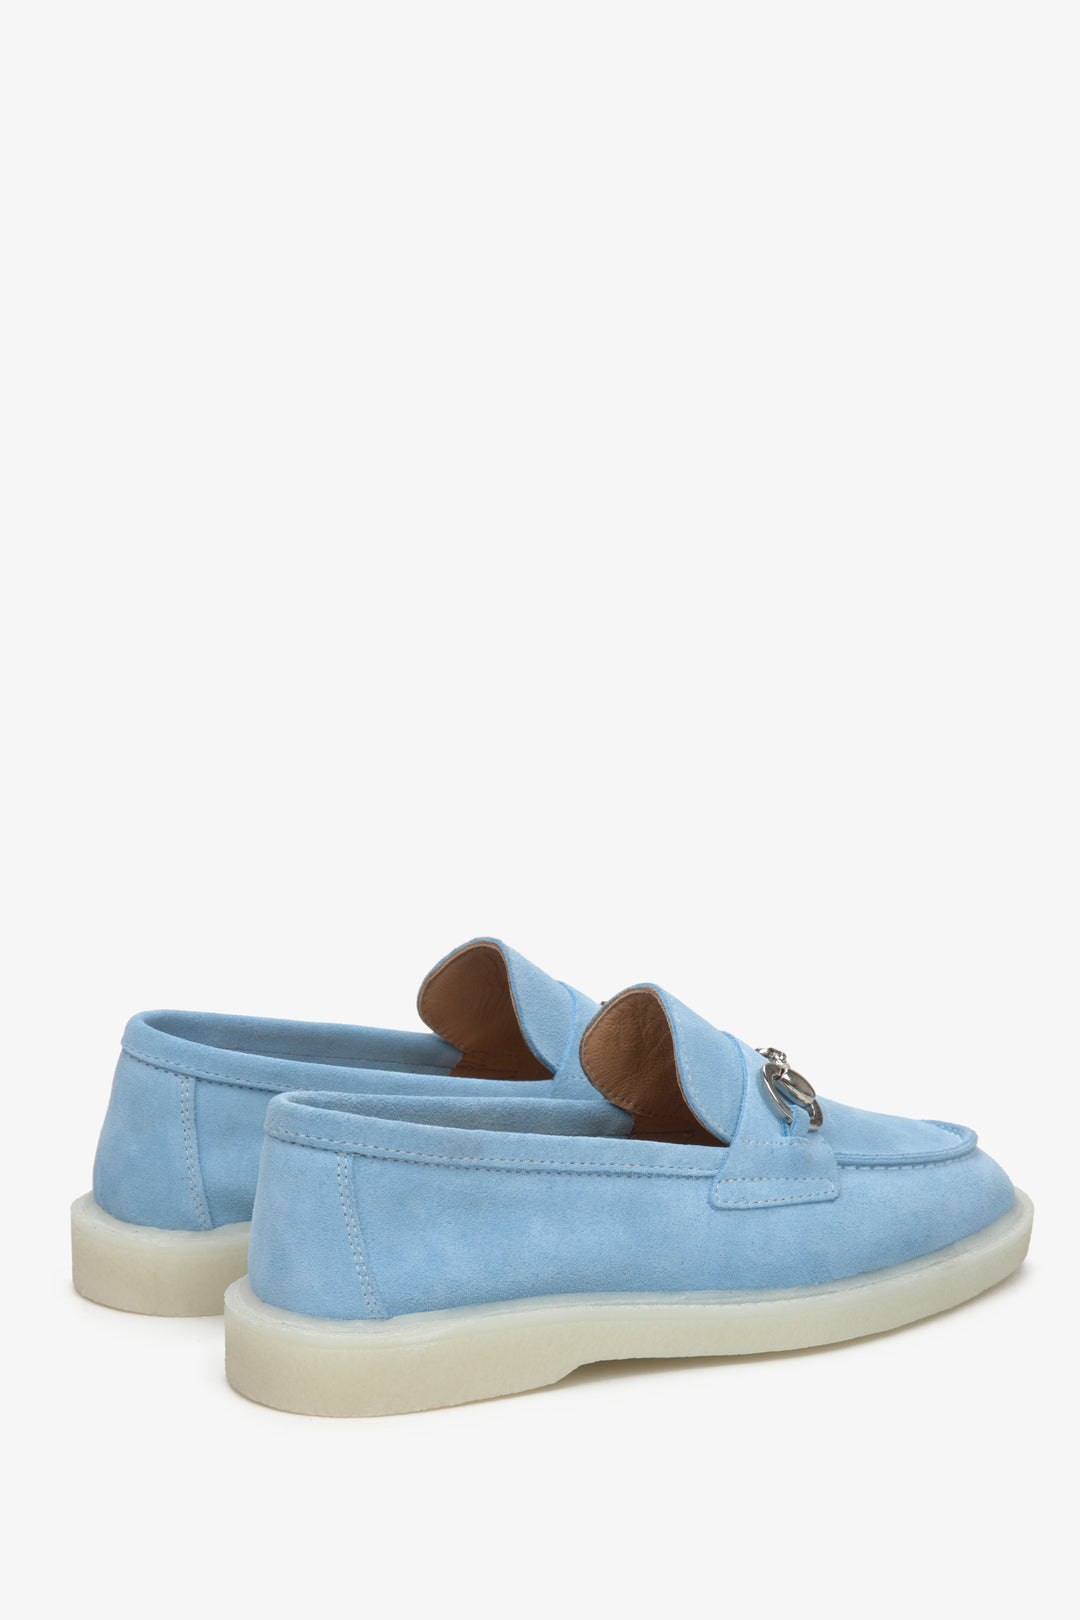 Women's light blue loafers made of velour and leather with gold buckle by Estro - close up on heel counter.